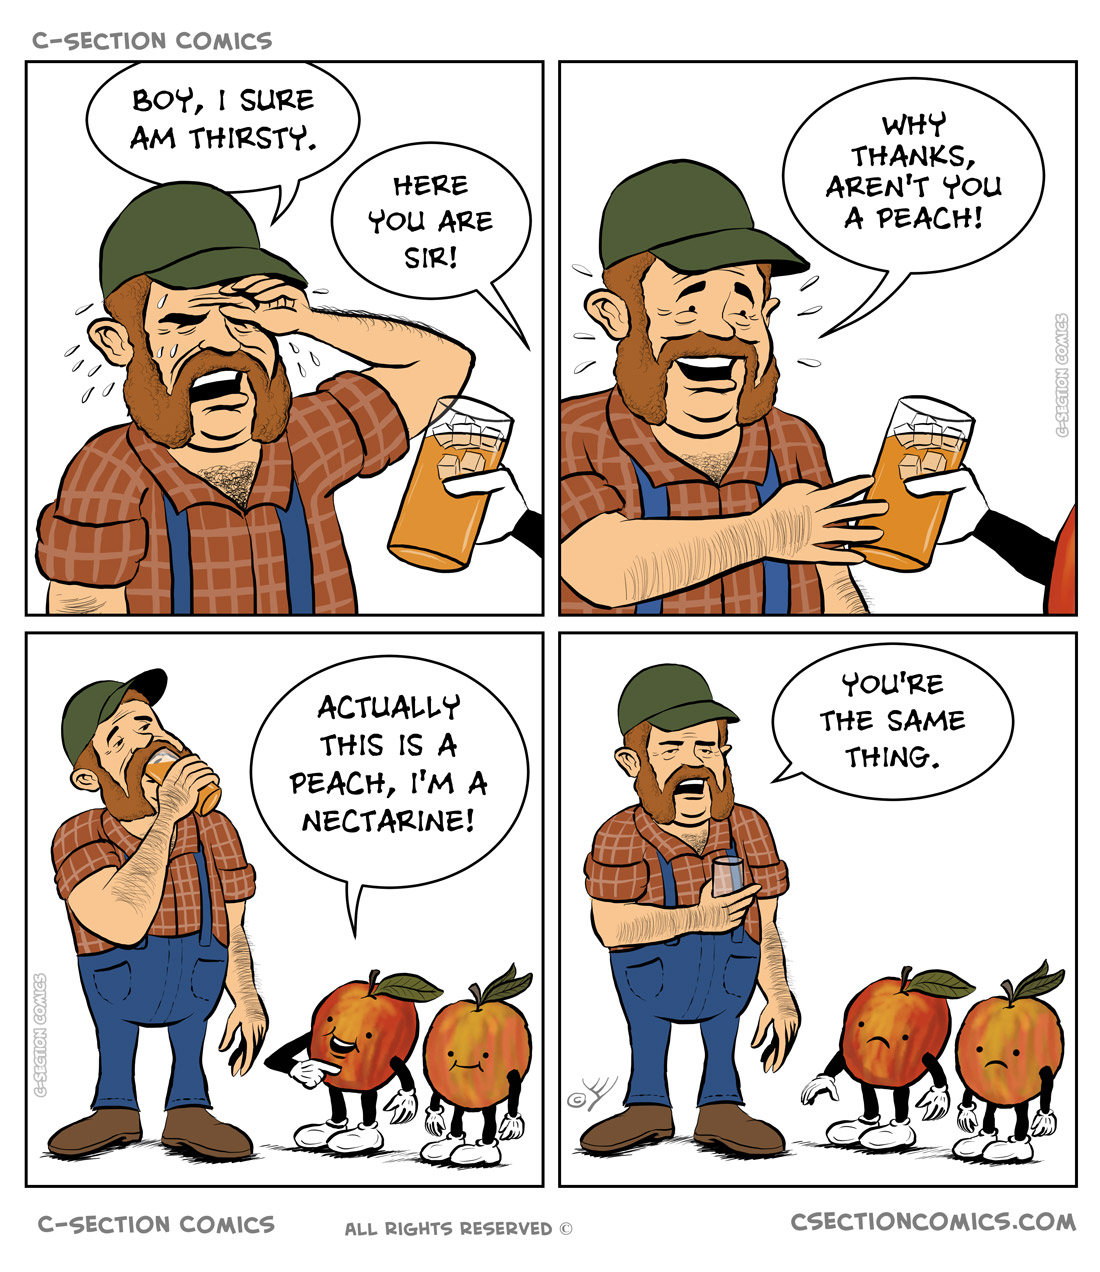 Aren't you a peach - by C-Section Comics